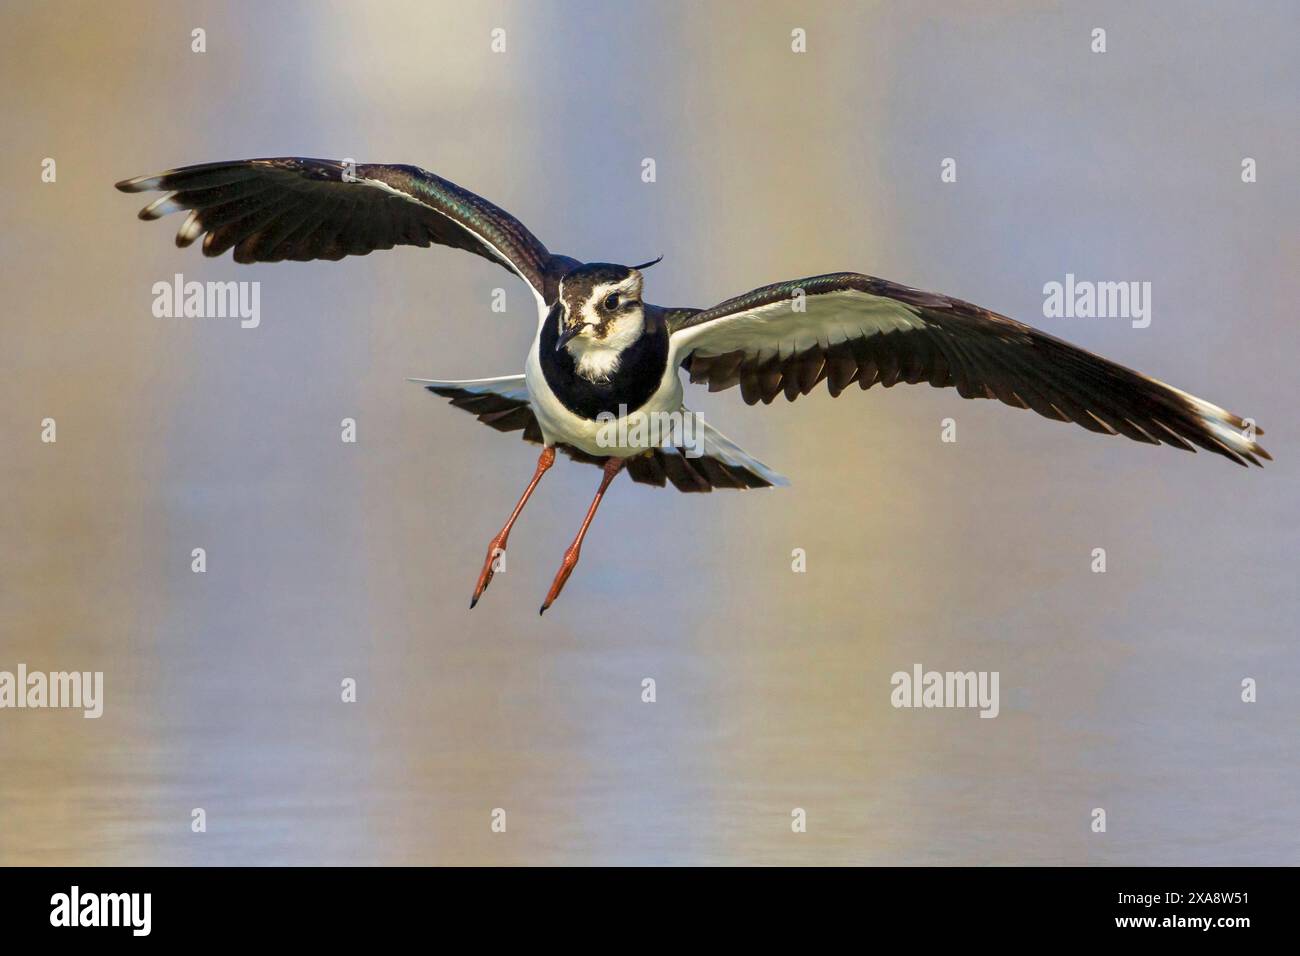 northern lapwing, peewit, pewit, tuit, tewit, green plover, pyewipe (Vanellus vanellus), flying, front view, Italy, Tuscany, Firenze Stock Photo